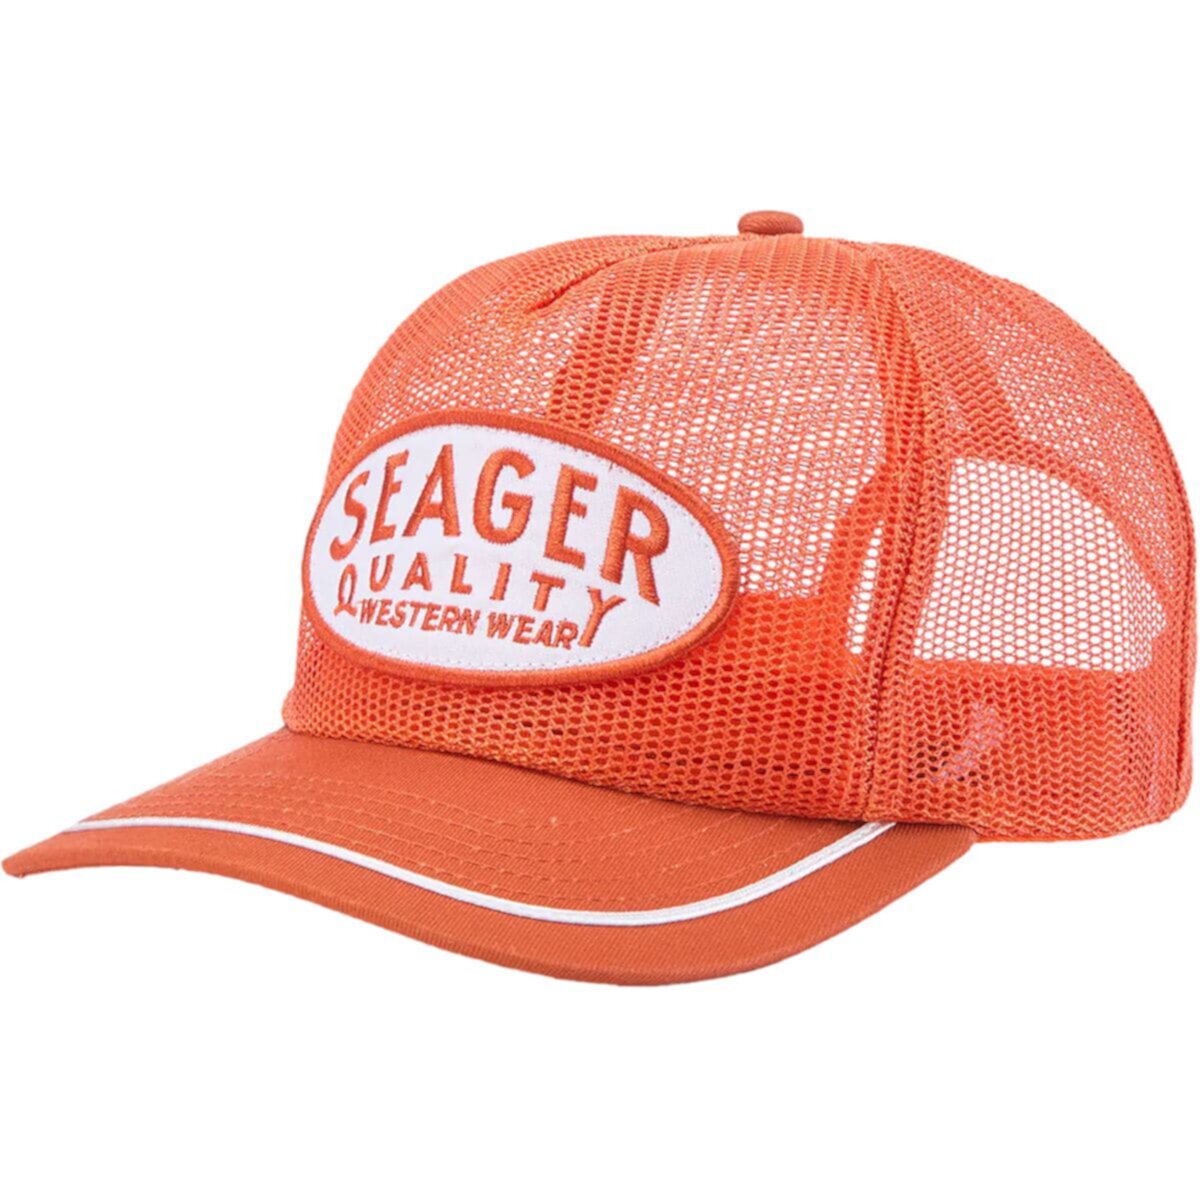 Old Town All Mesh Snapback Seager Co.